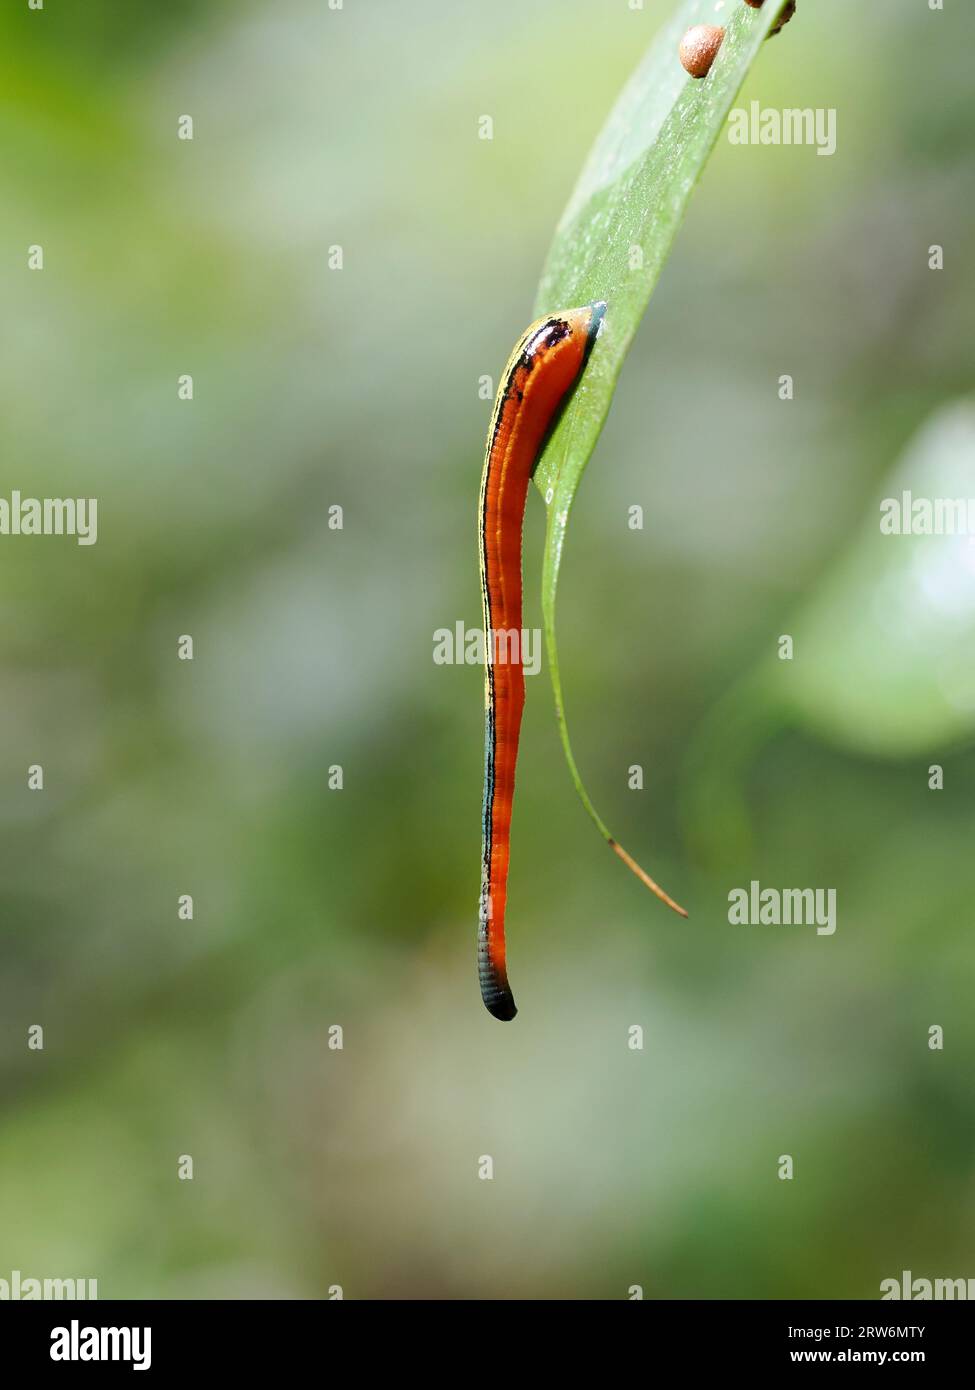 Tiger Leech or Stnging Land Leech (Haemadipsa picta) clinging to green leaf, rainforest, Borneo, Malaysia Stock Photo